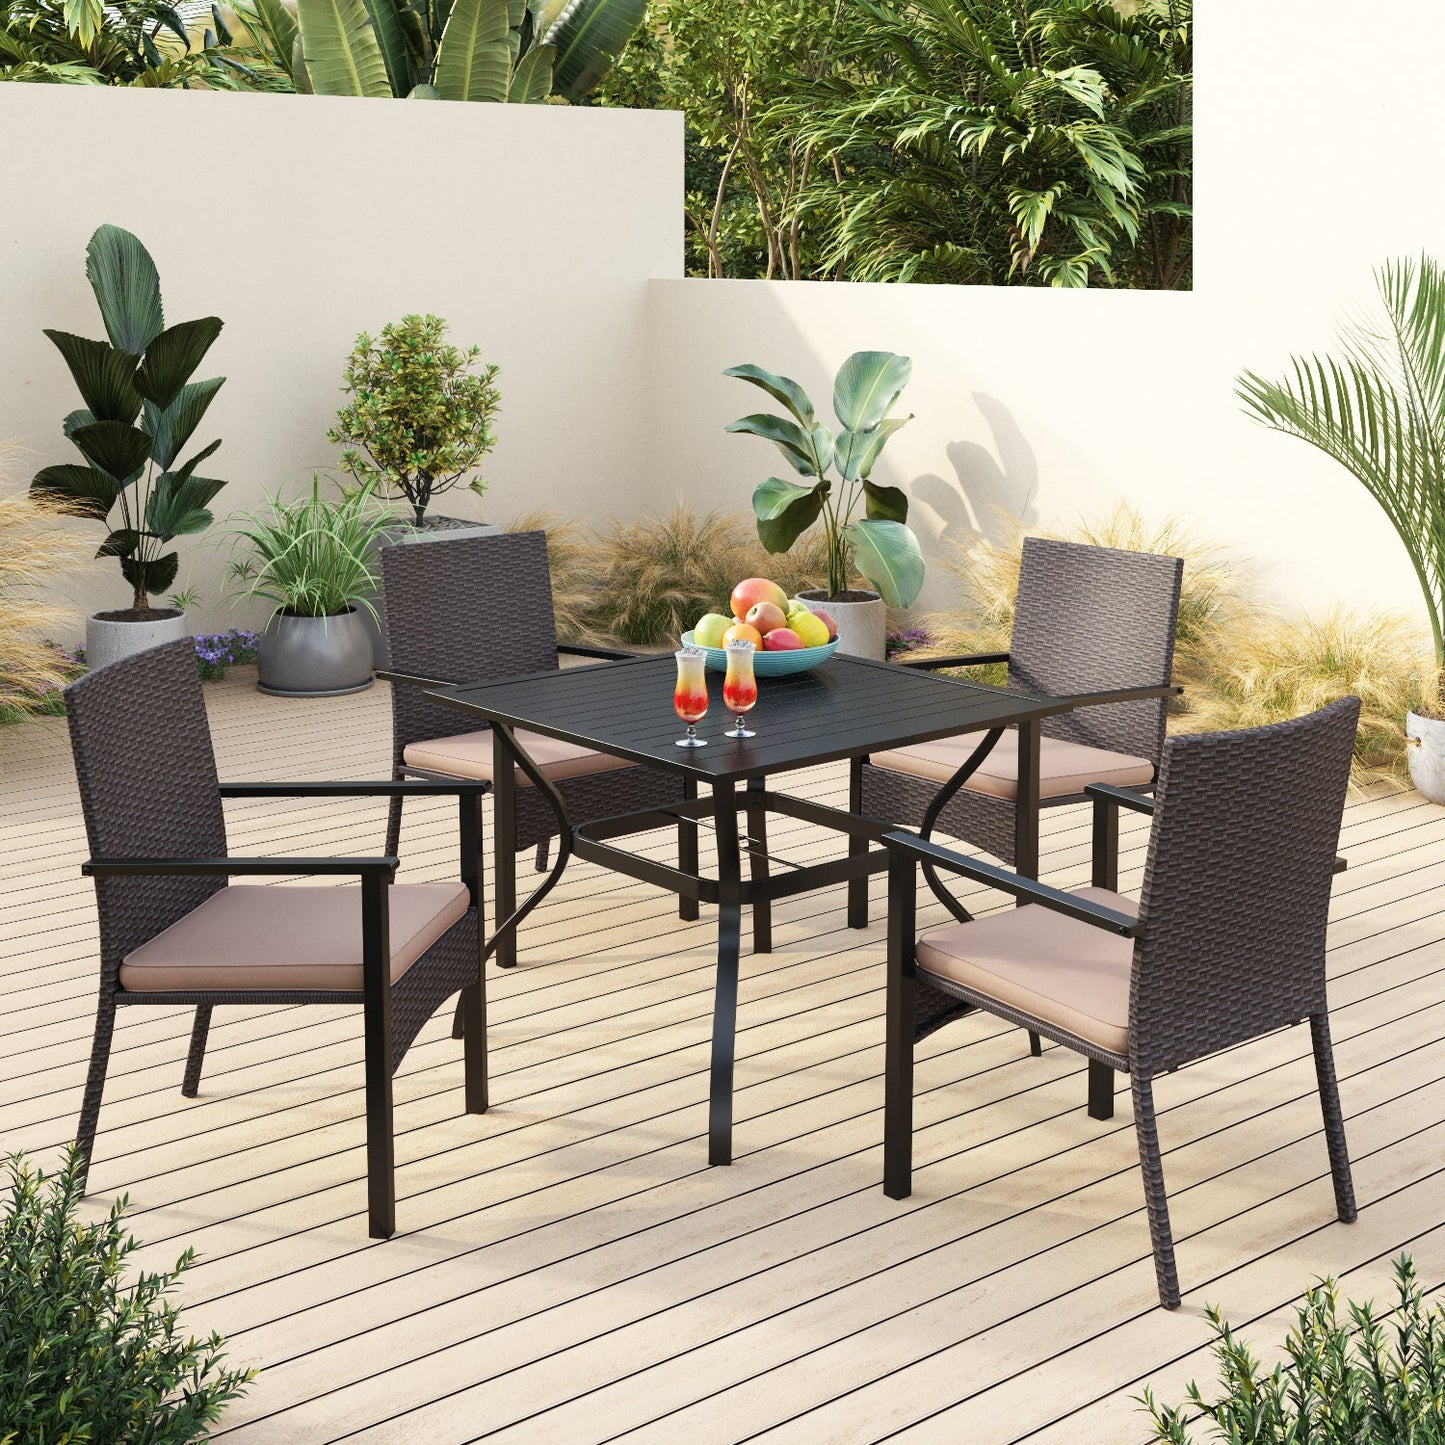 Sophia & William 5 Pieces Outdoor Patio Dining Set Dining Chairs and Metal Square Dining Table